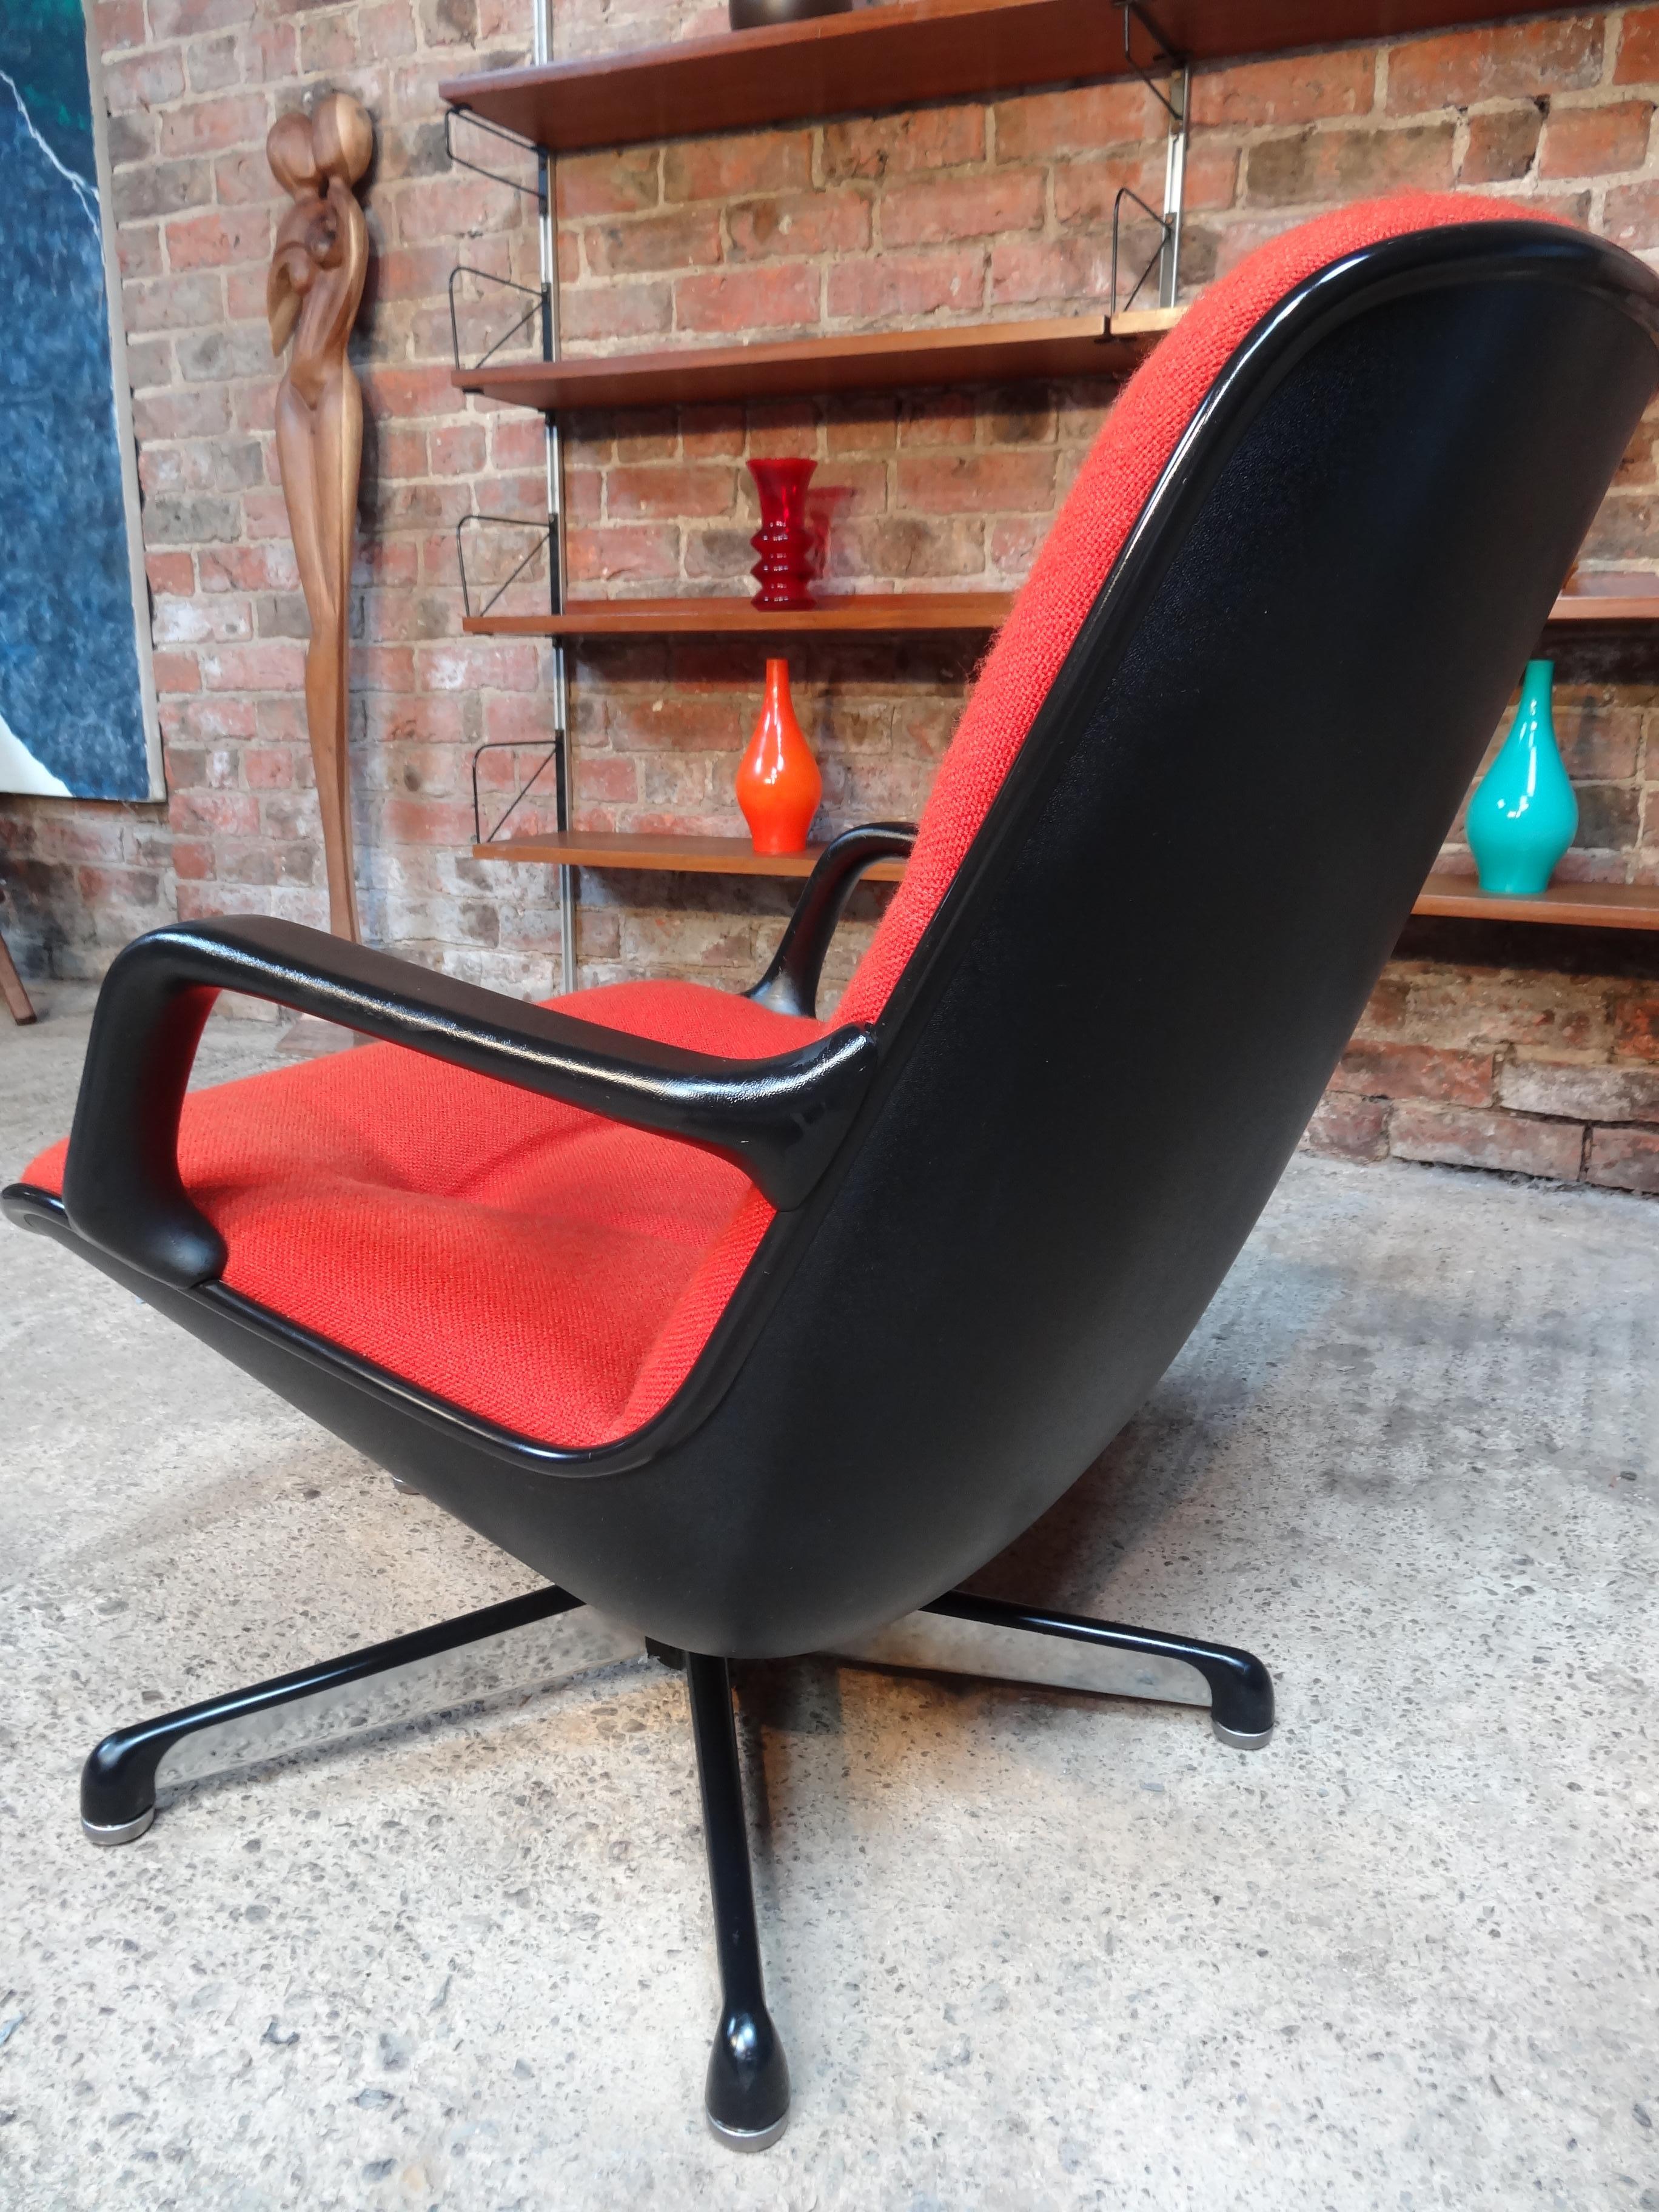 Italian executive armchair by Charles Pollock for Comforto, stunning orange fabric swivel desk chair, This plastic / metal framed chair is in very good vintage condition, A classic chair is the antiques of the future and look great in any decor.